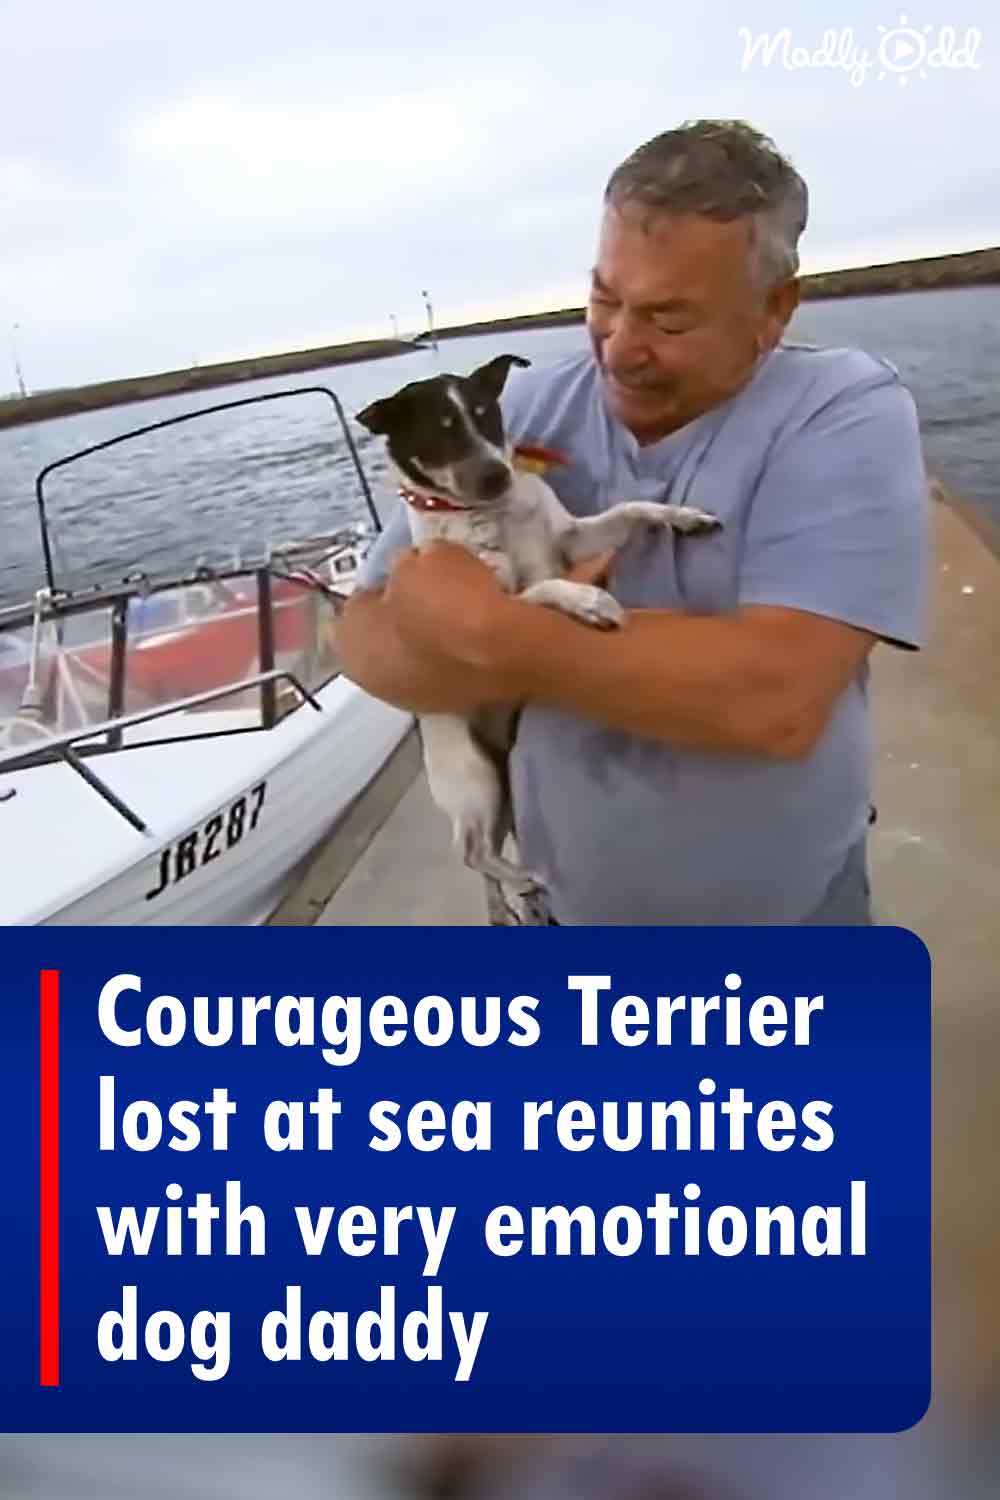 Courageous Terrier lost at sea reunites with very emotional dog daddy